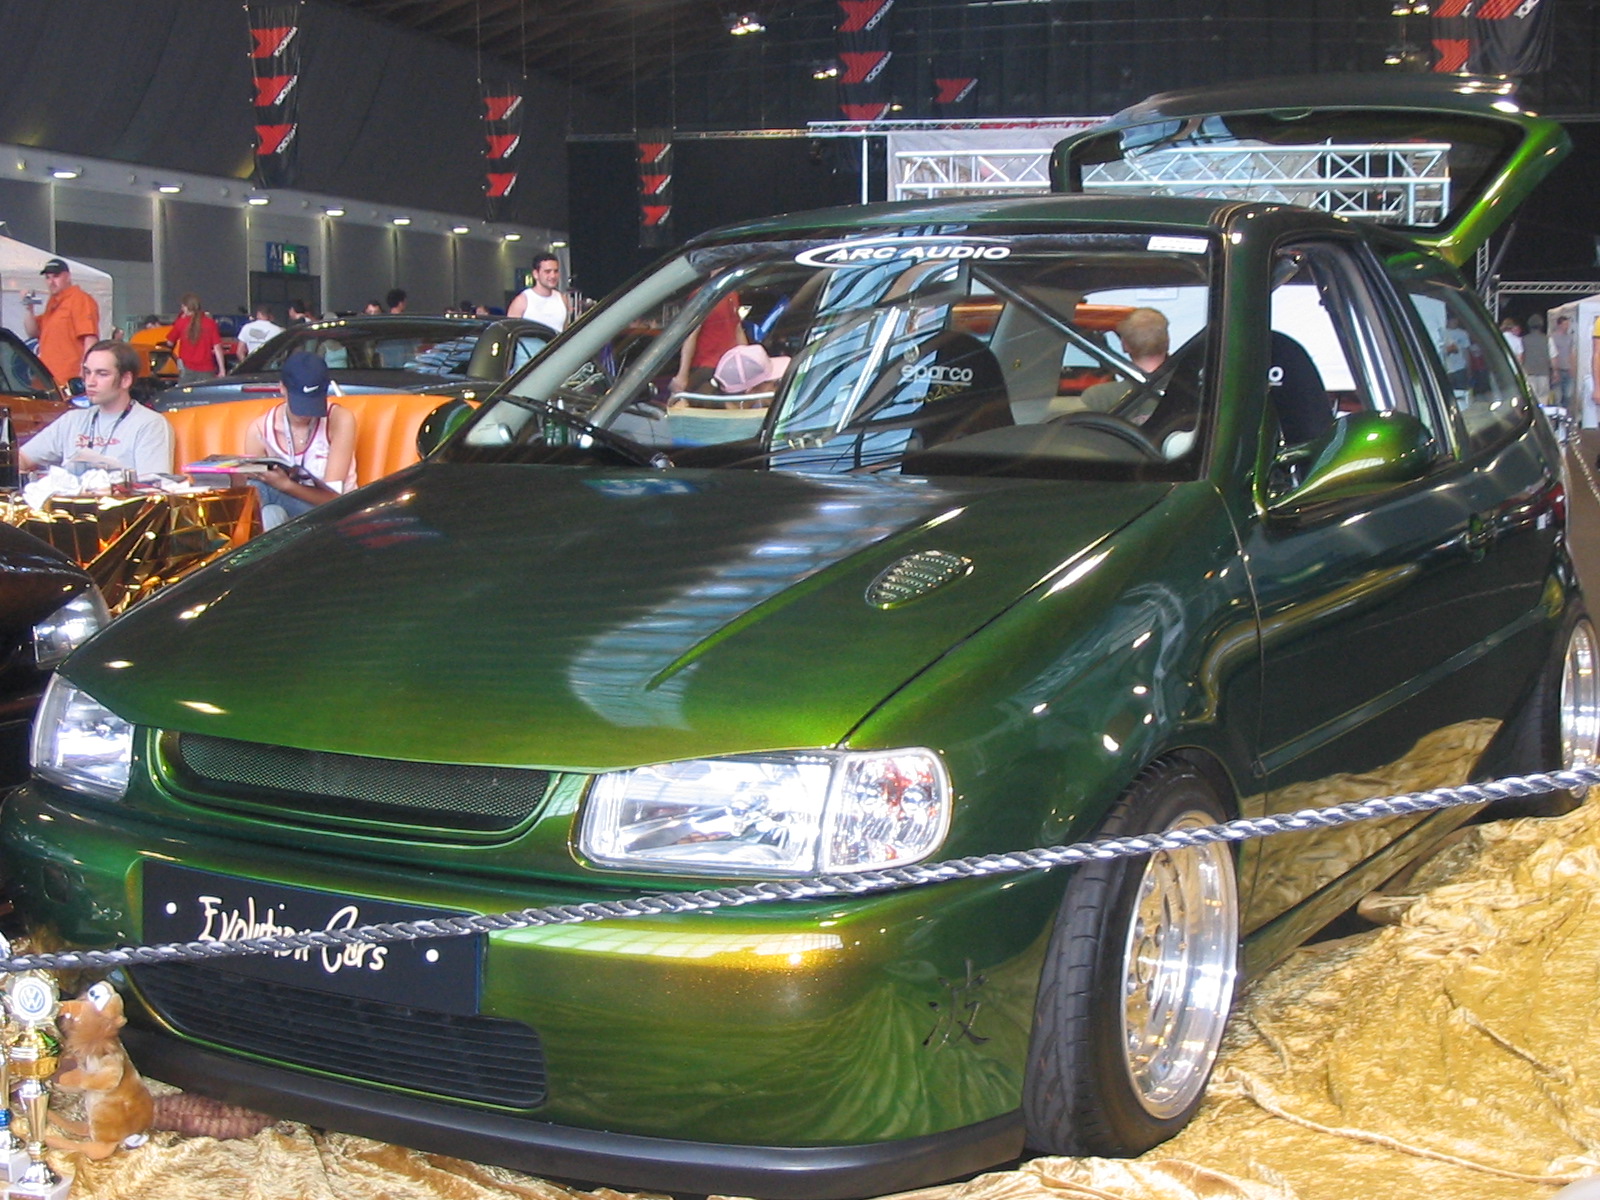 Anhang ID 3710 - Tuning World Bodensee 2005 050.jpg